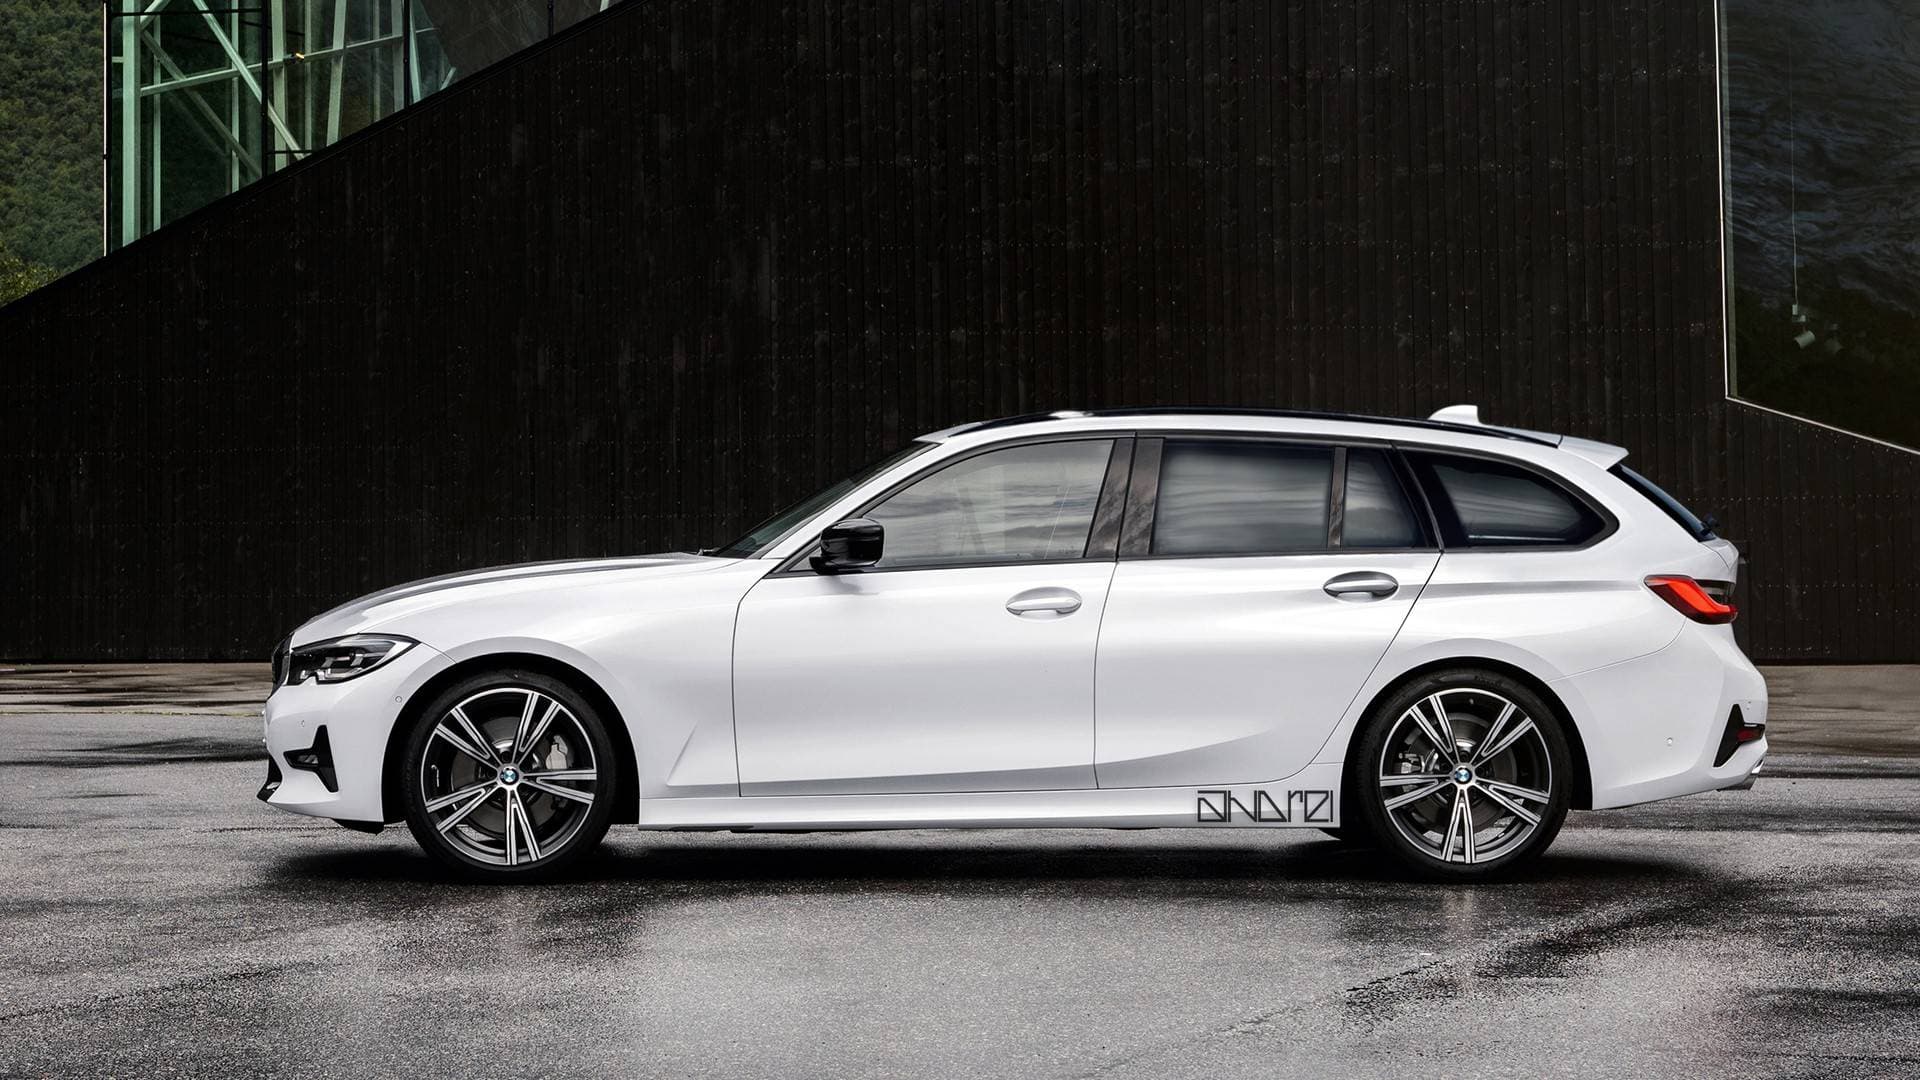 BMW M3 Wagon Is a Real Possibility for the Next-Generation 3 Series